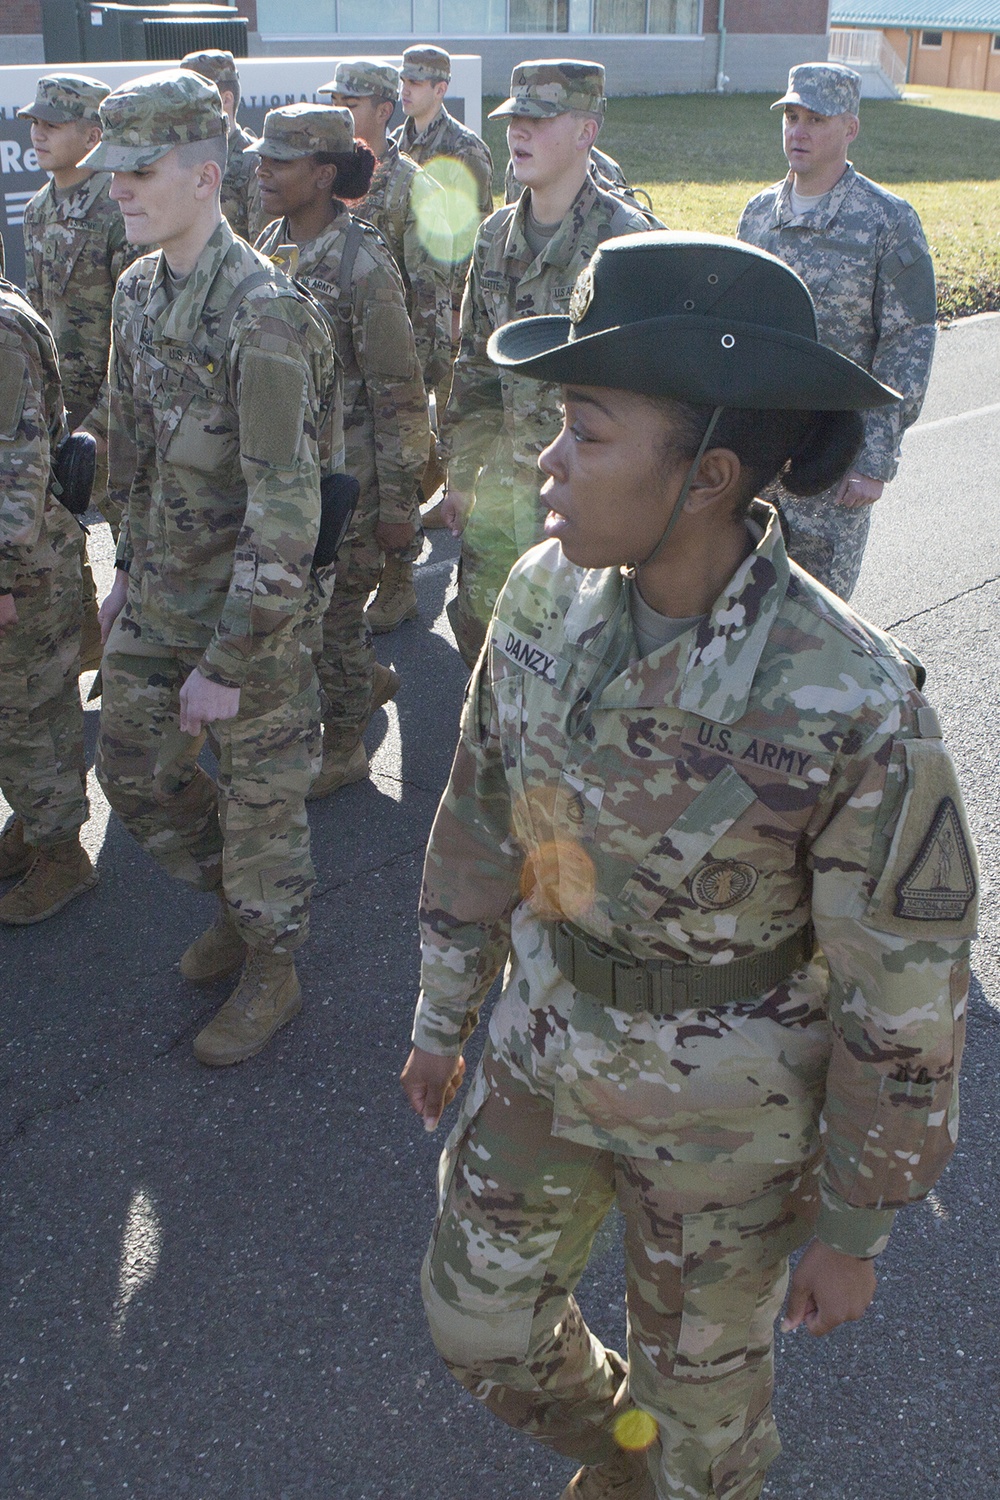 New Jersey Army National Guard's First Female Drill Sergeant